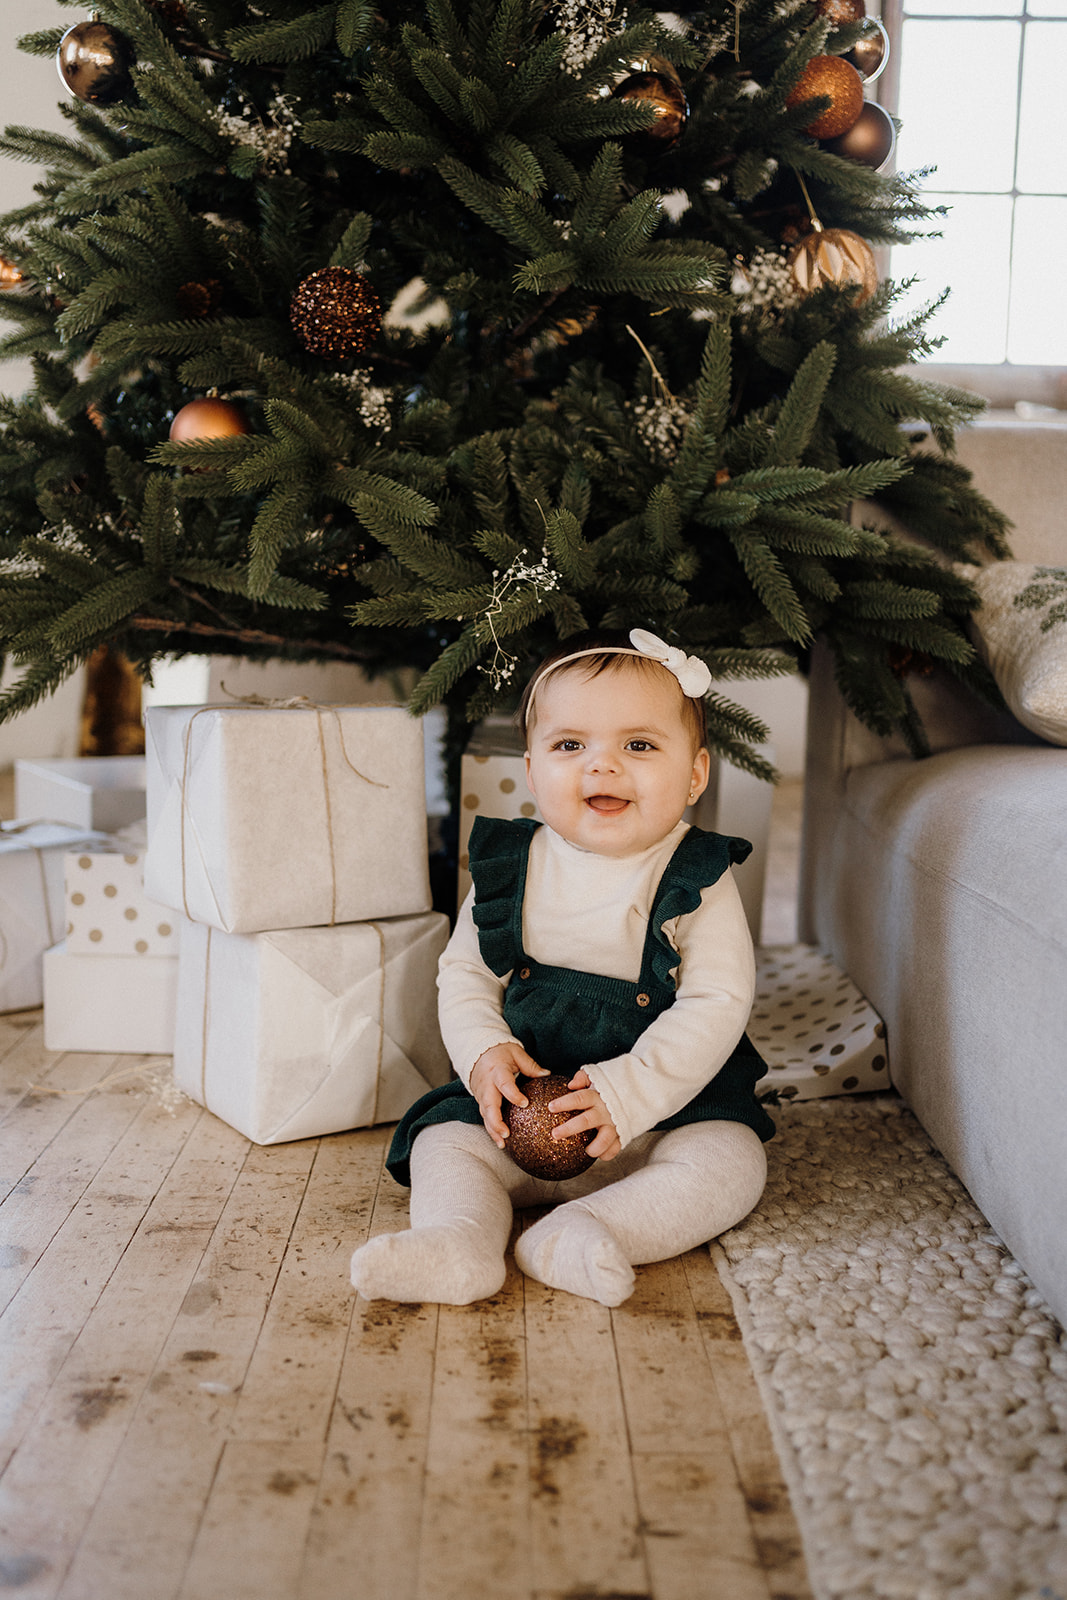 A child sitting on the ground in front of the Christmas Tree.